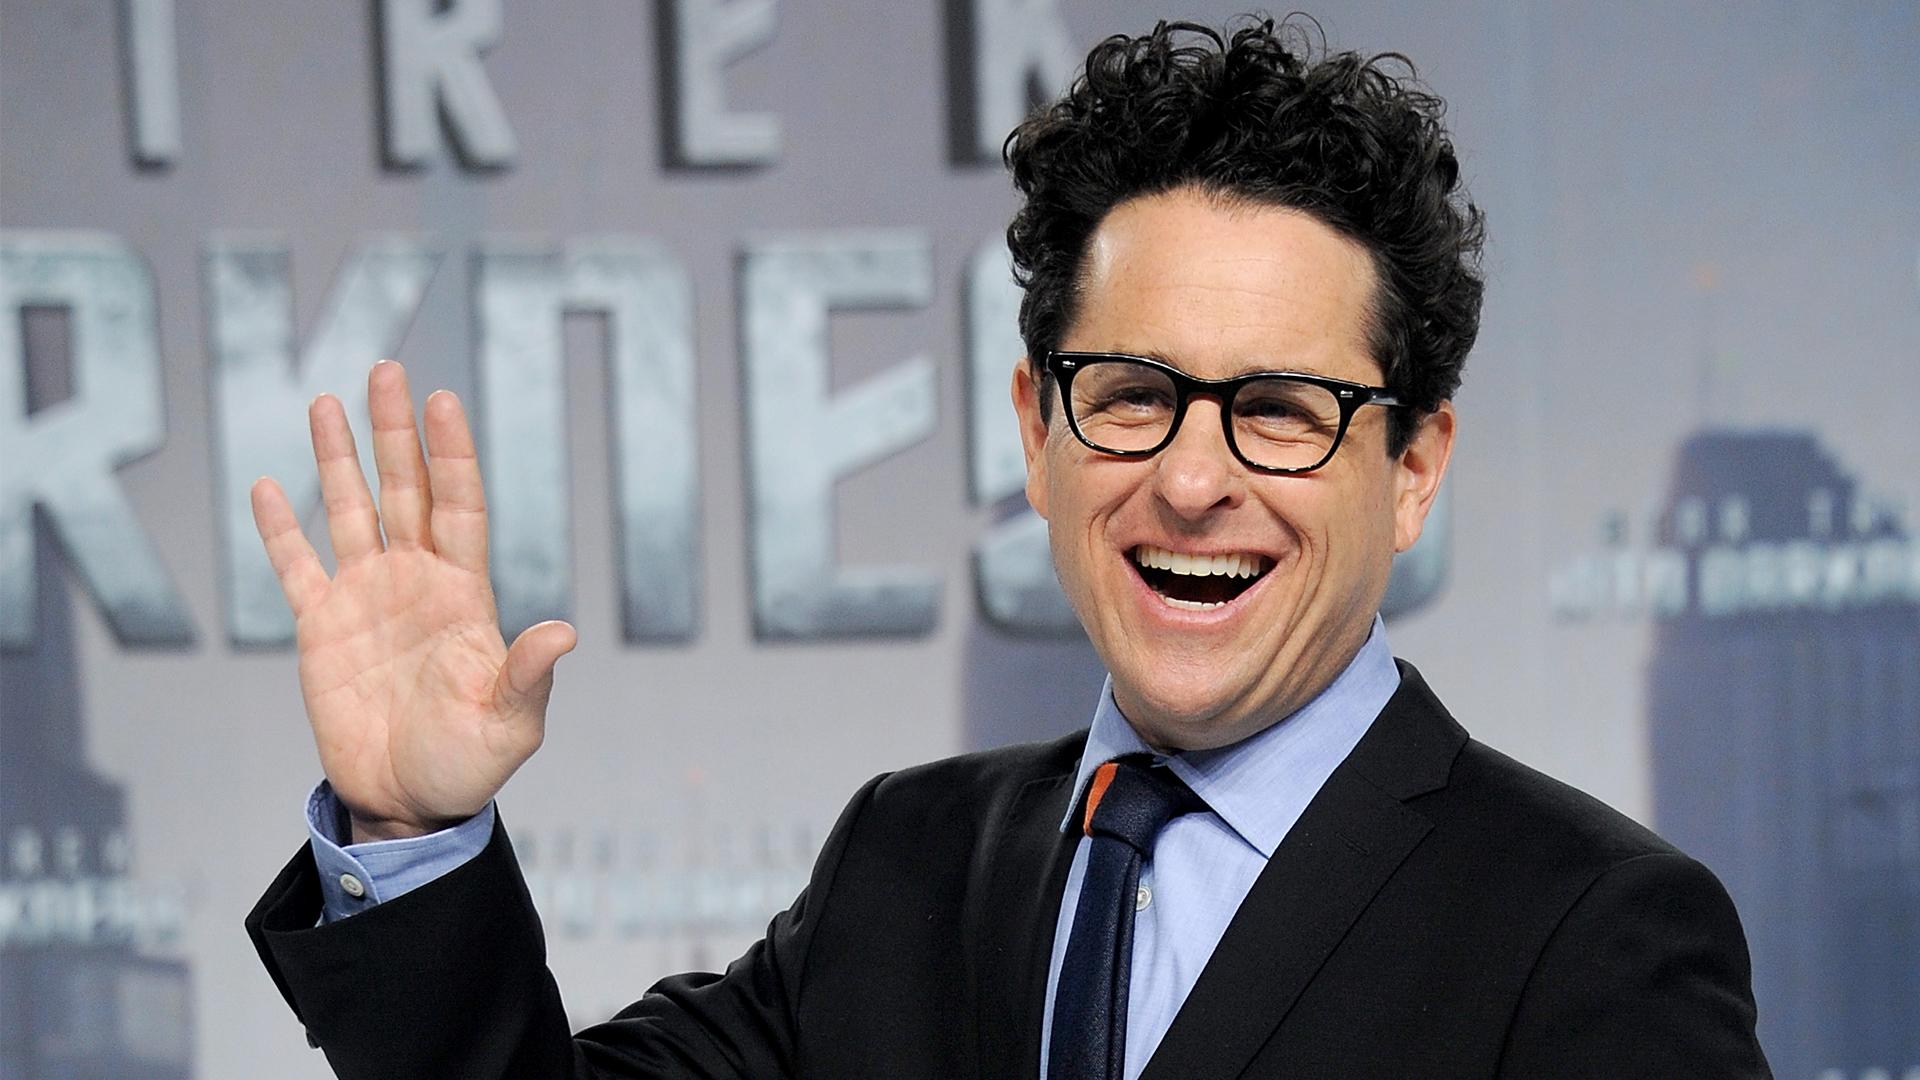 The director of "Star Wars" JJ Abrams will make great video games